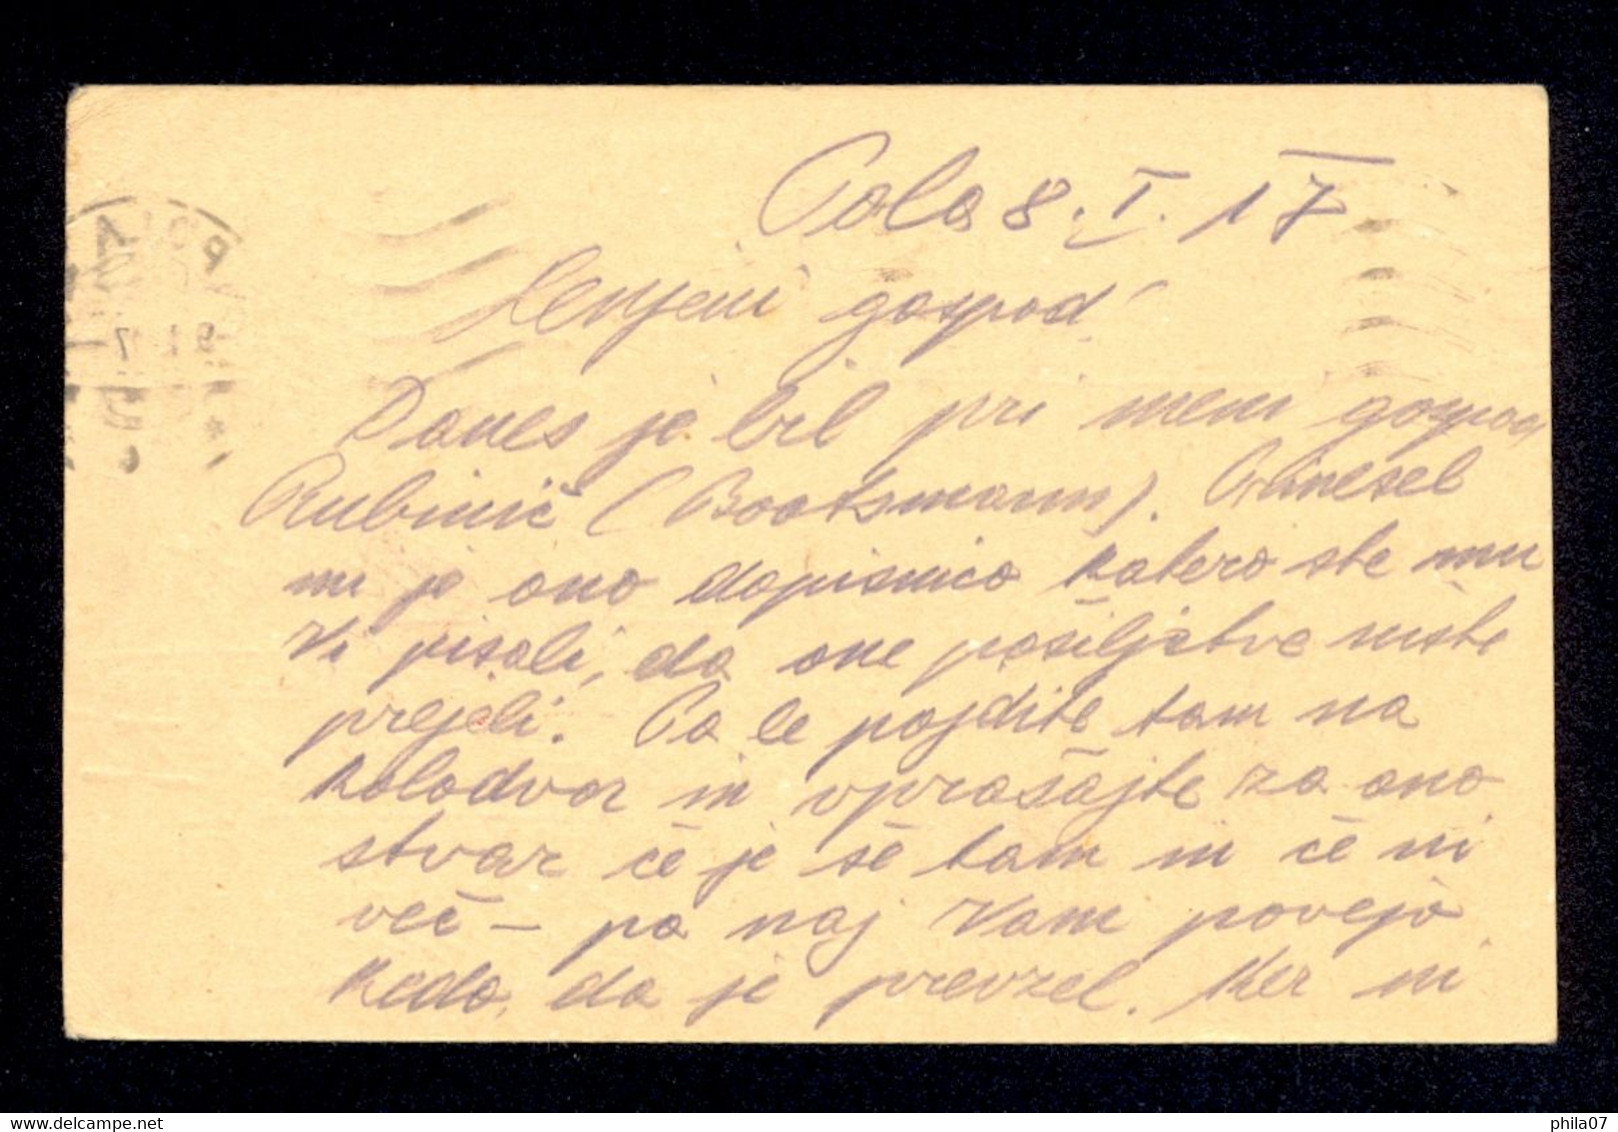 Austria - Stationery Sent From Pula To Lebring, Readdressed To Ponte. Military Censorship Pula 1917. - Storia Postale